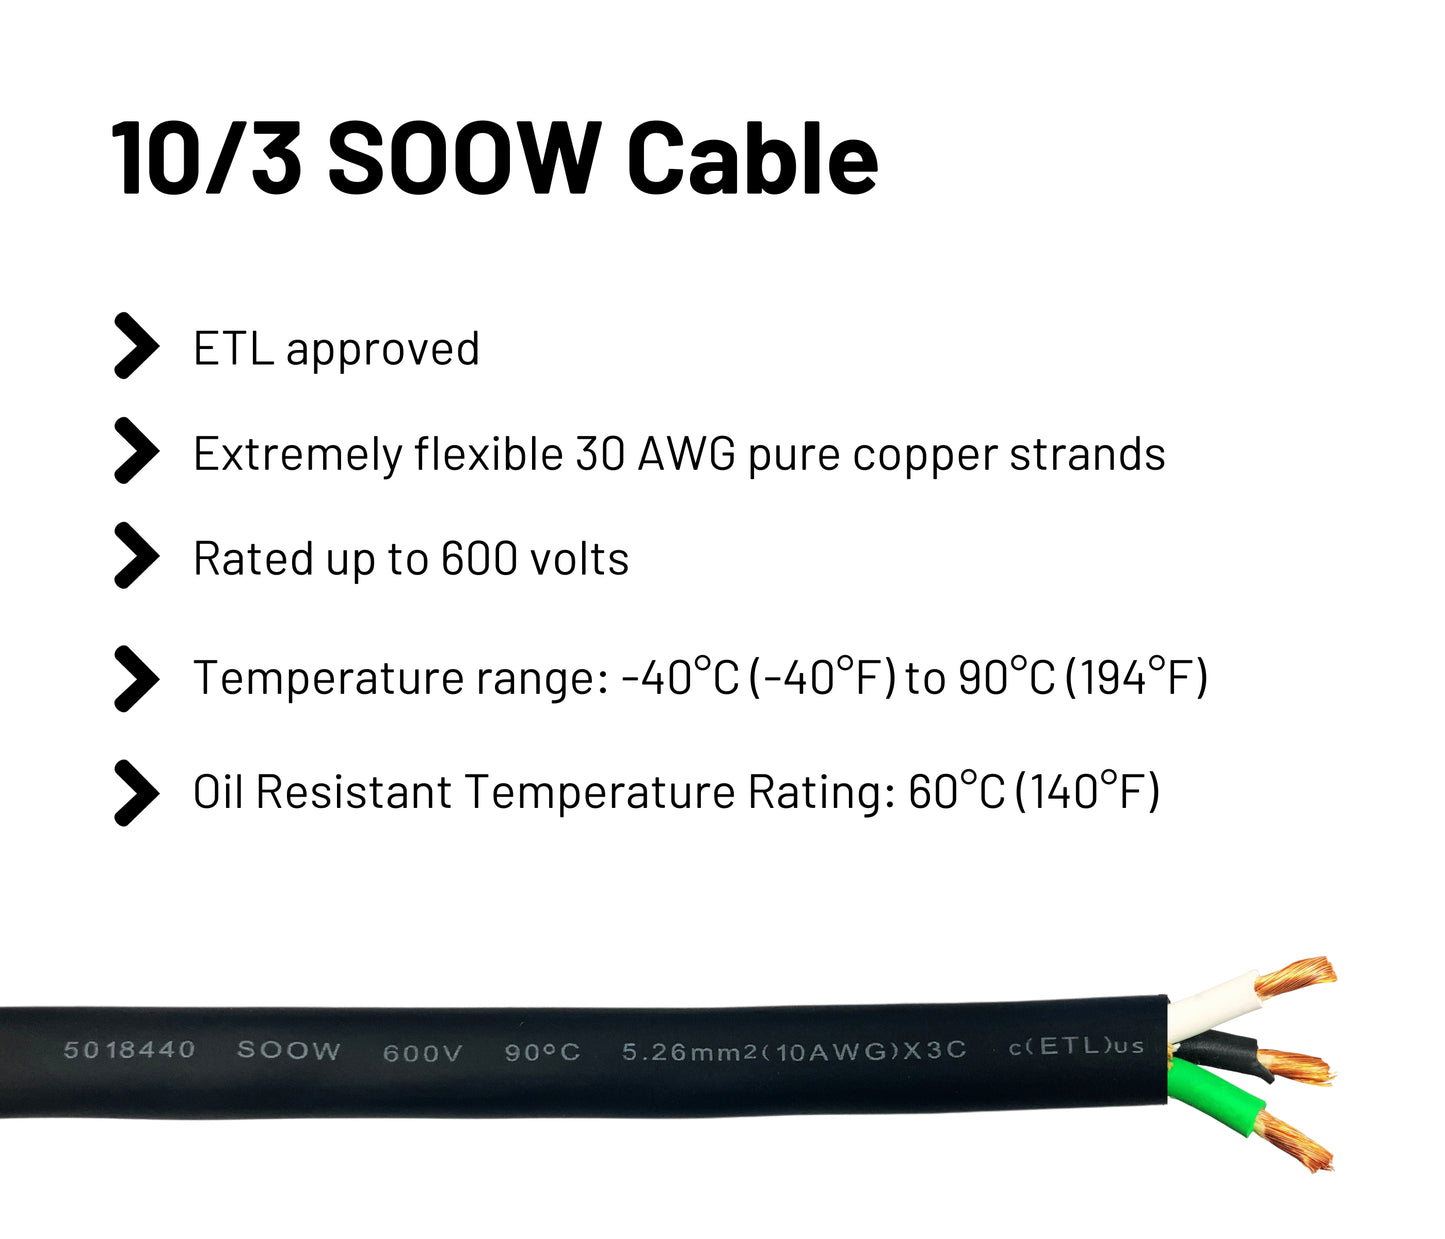 10/3 SOOW Cable Cord Wire - 10 Gauge 10 AWG 3 Conductor 600V Portable Power Extension Cord Cable with Ultra Flexible Insulation Jacket